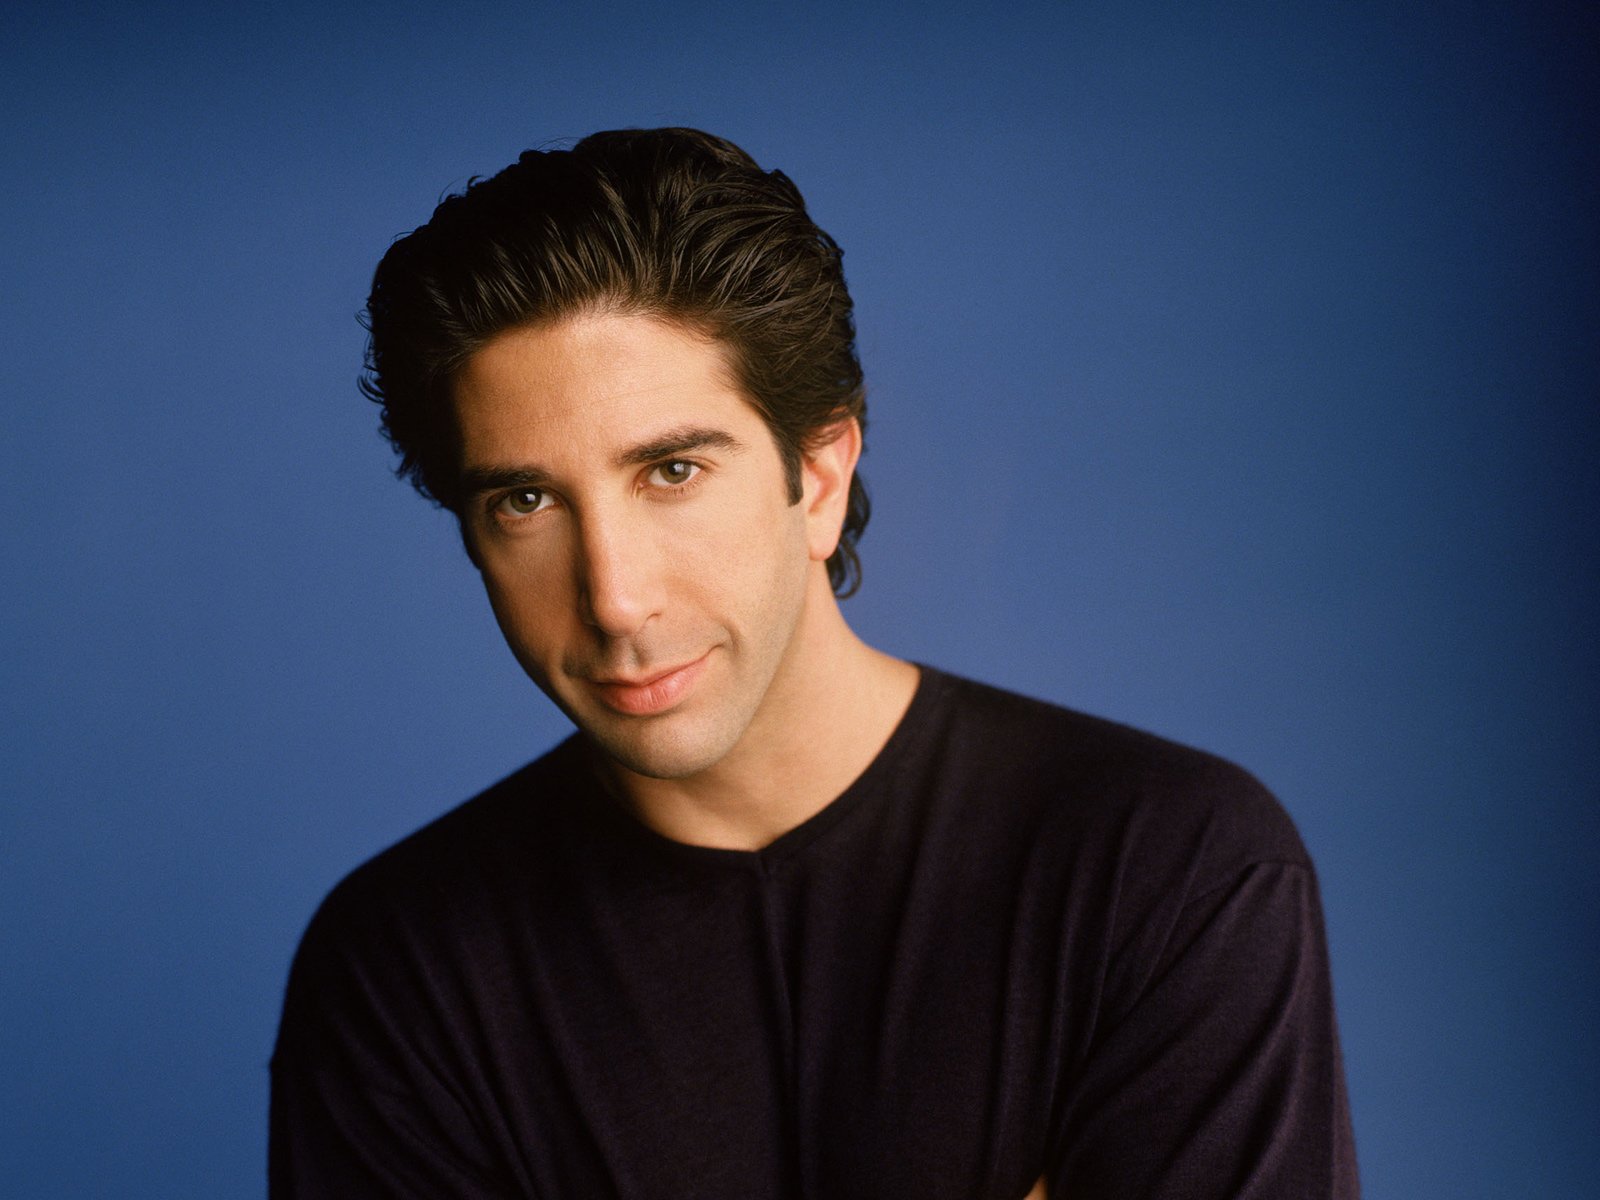 You are currently viewing Friends Characters – Ross Geller NBC Sitcom friends